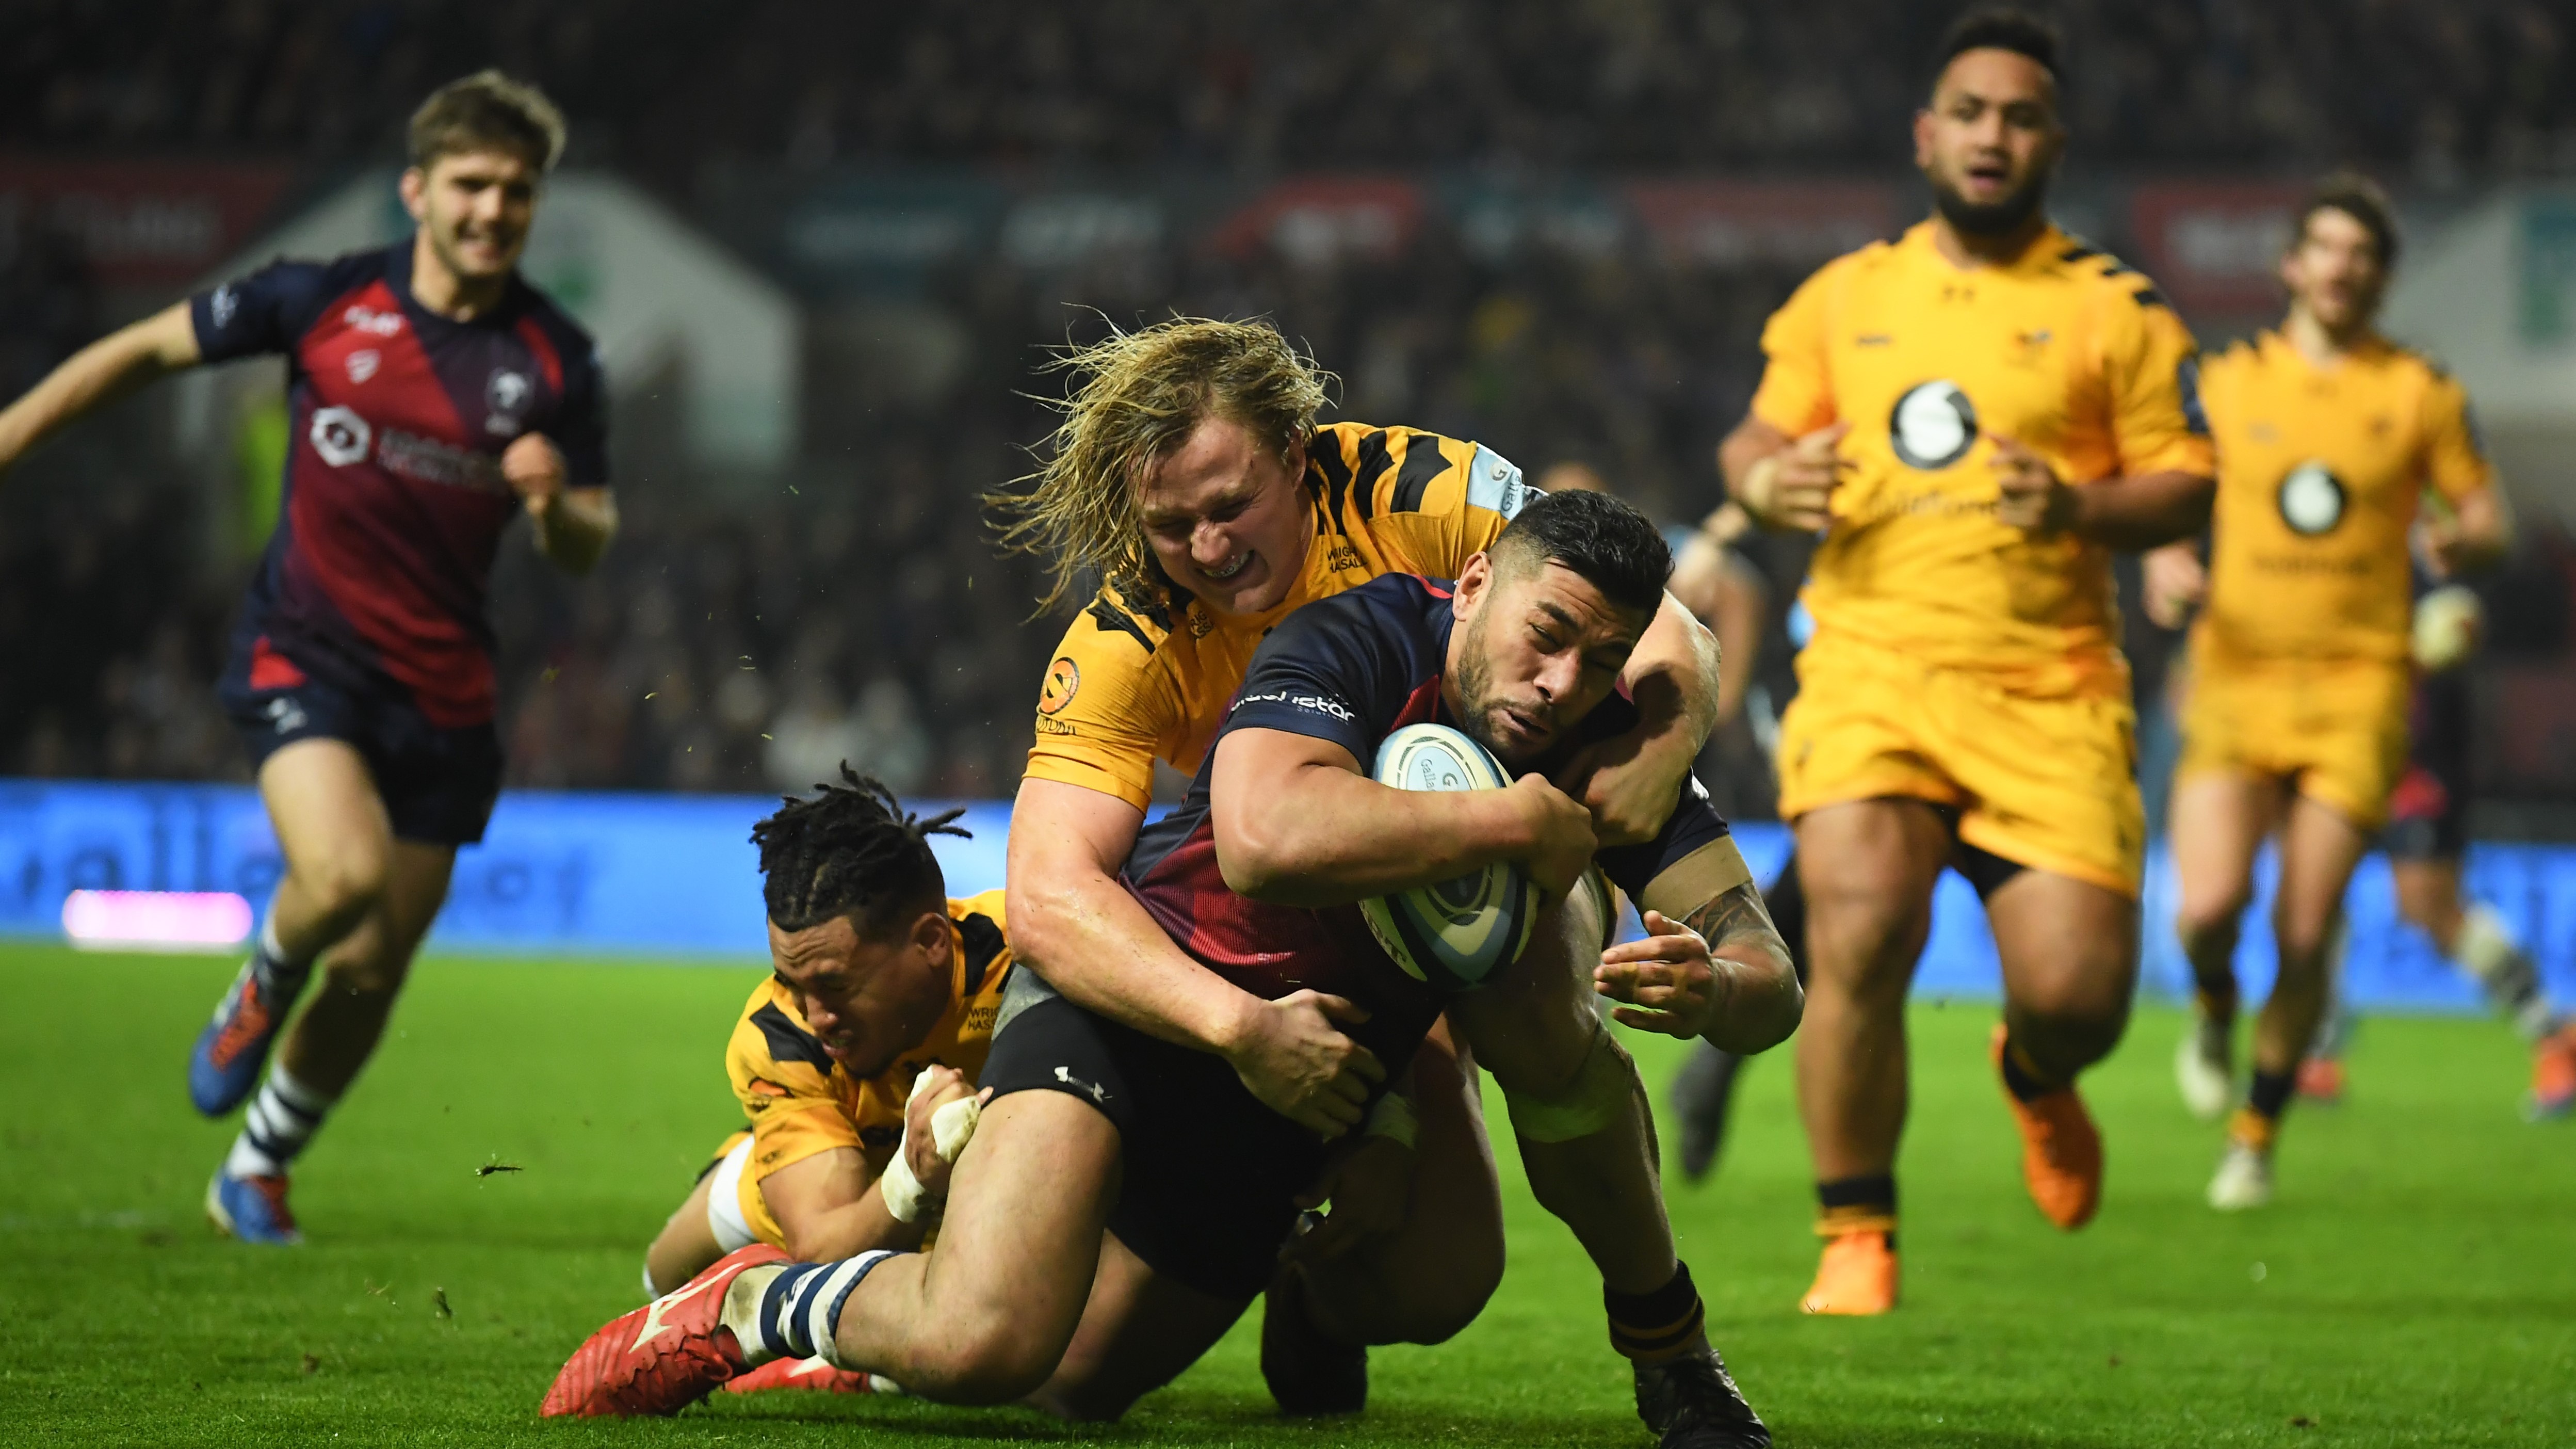 Wasps vs Bristol live stream how to watch Premiership rugby online anywhere today TechRadar